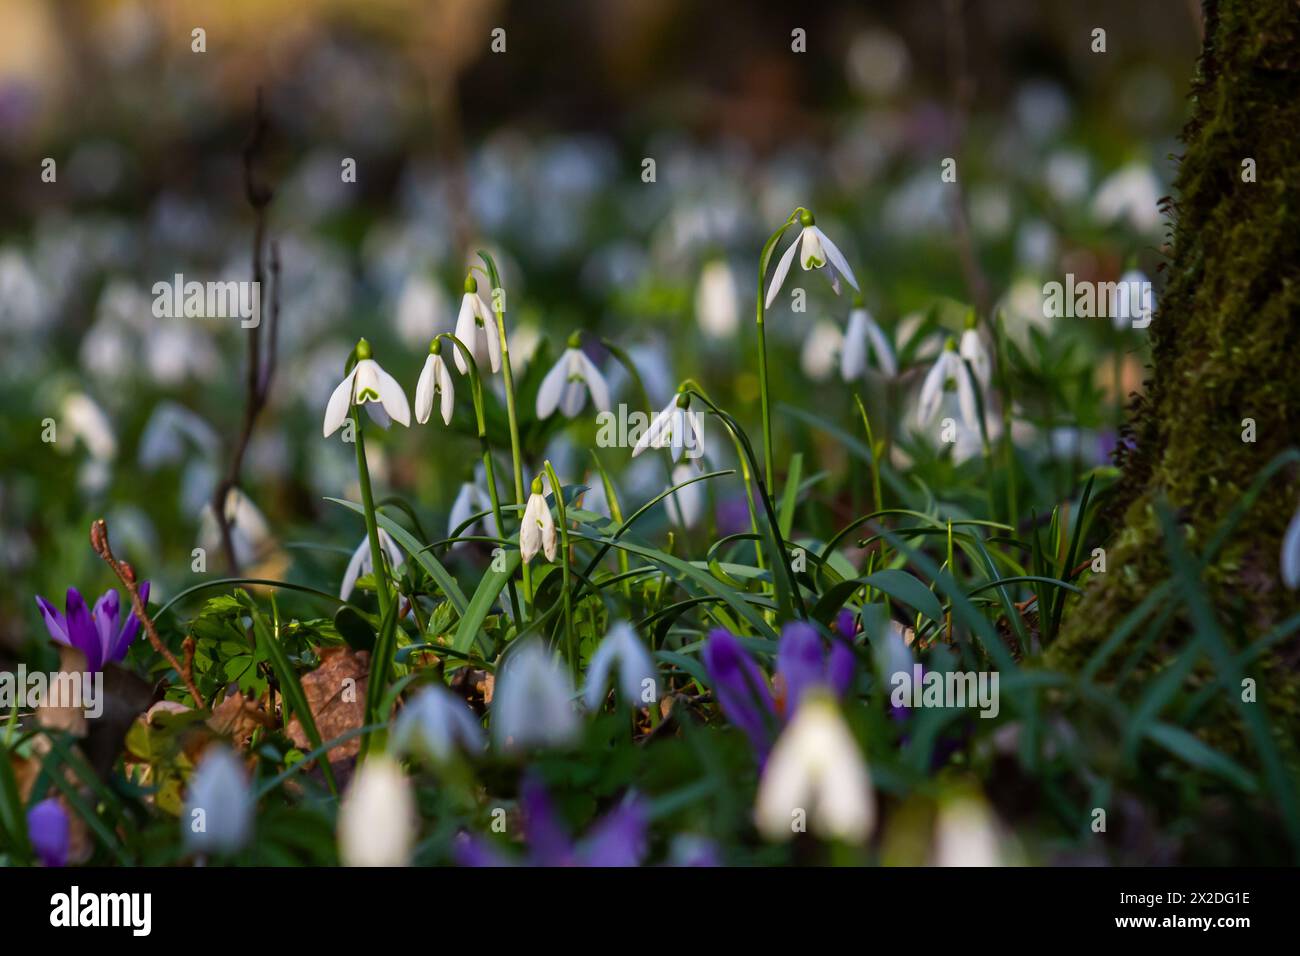 White snowdrop flowers. Galanthus blossoms illuminated by the sun in the green blurred background, early spring. Galanthus nivalis bulbous, perennial Stock Photo